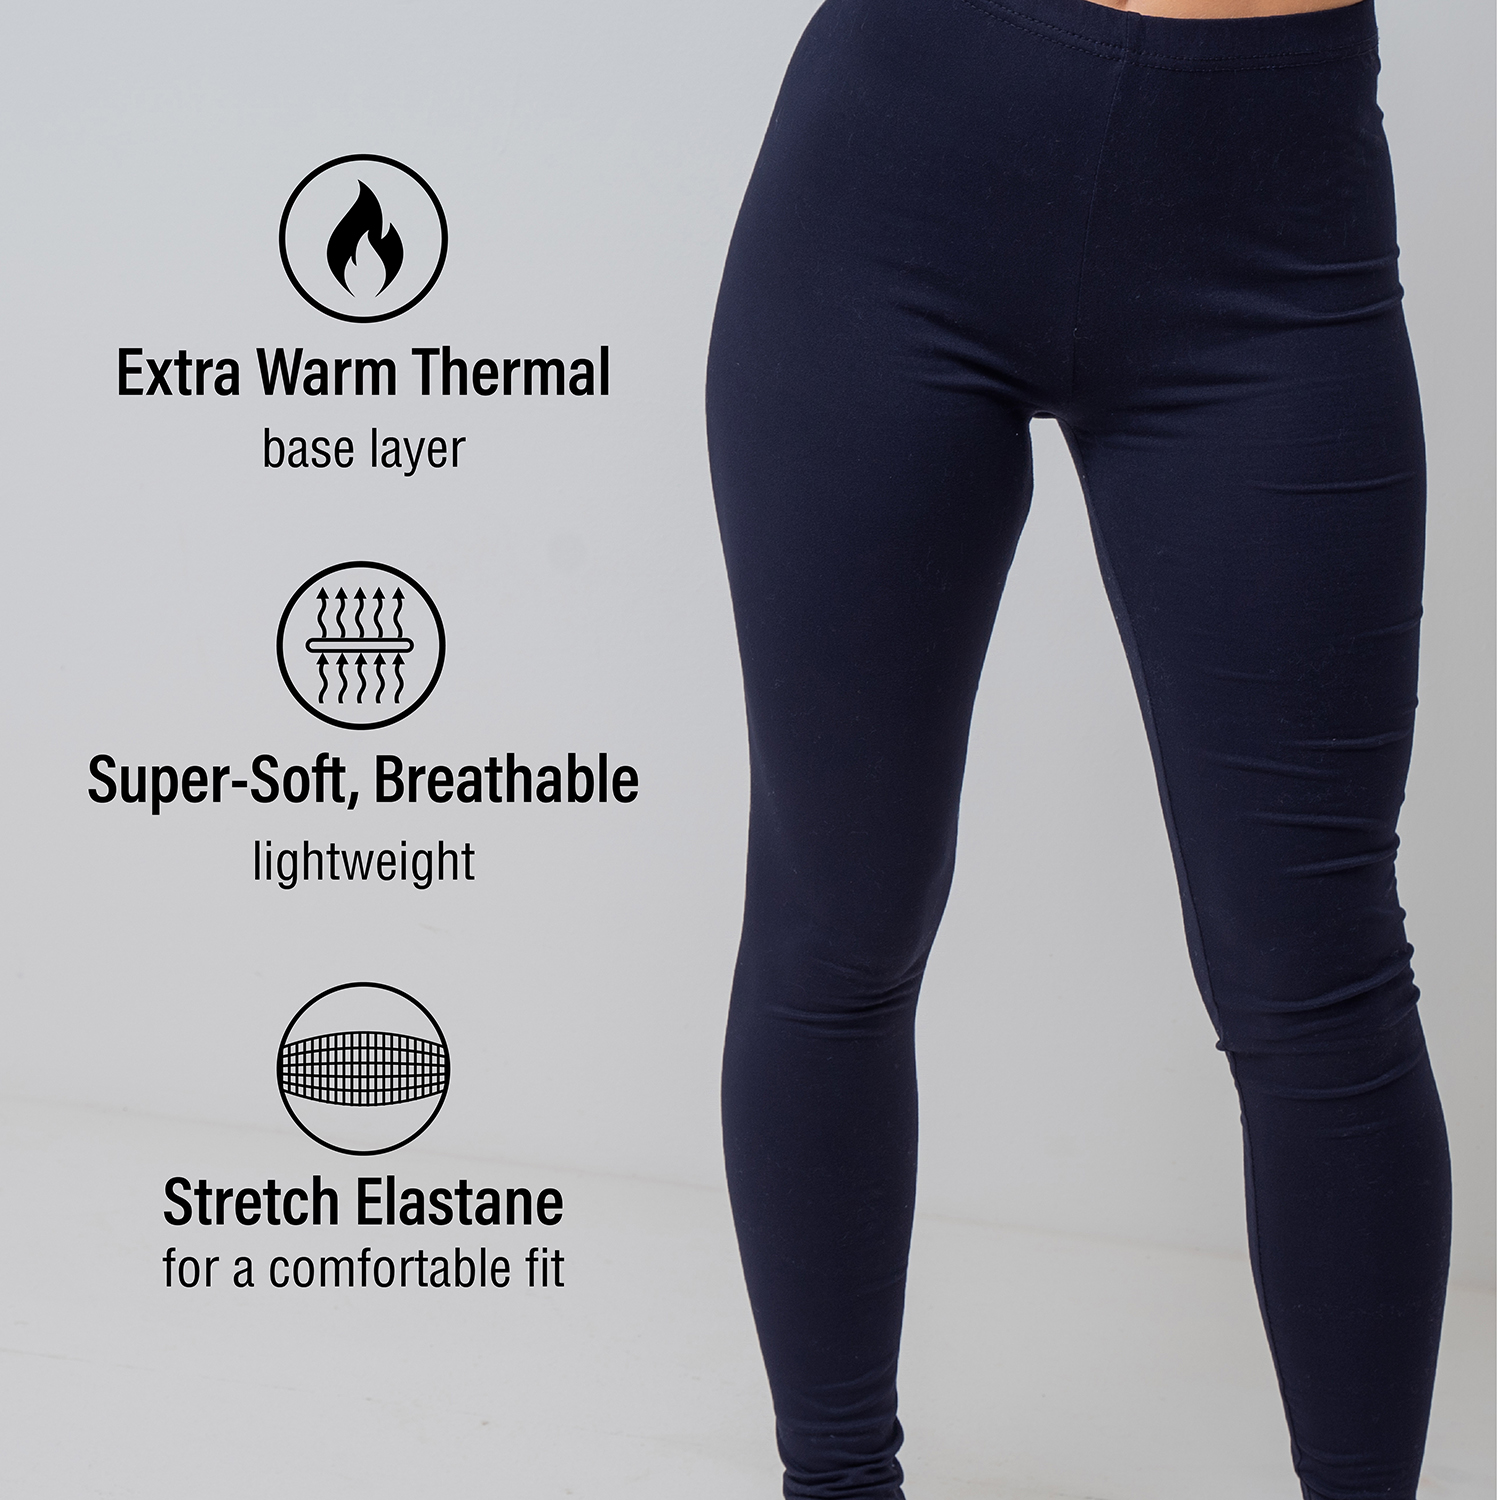 Seamless Thermal Lace Insulated Womens Clothing Antibacterial, Warm &  Shaped For Winter From Diao04, $10.97